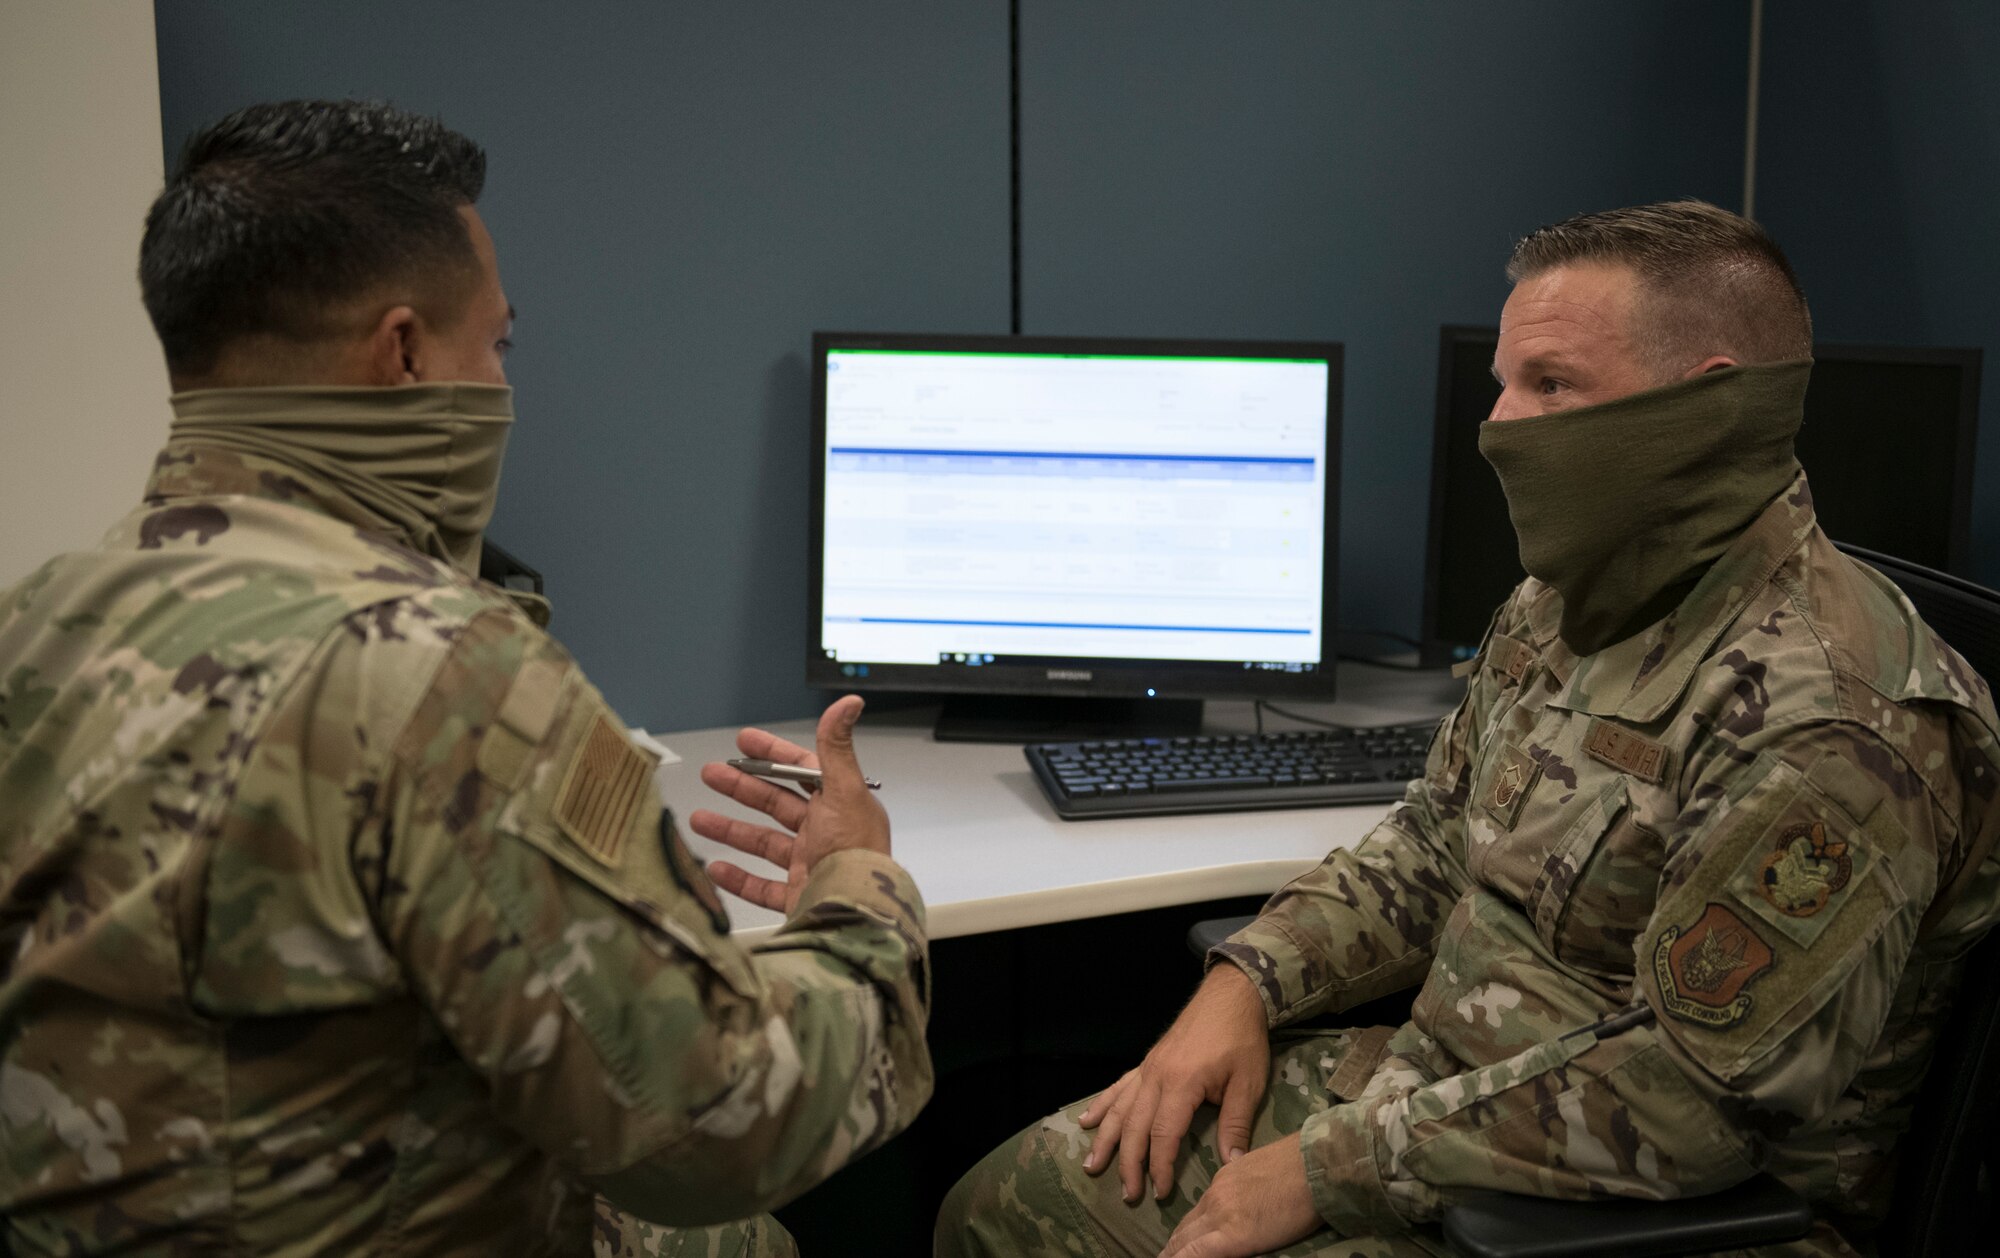 Master Sgt. Nathan Sigars, 419th Inspector General superintendent, instructs Tech. Sgt. Luis Choto, 419th Logistics Readiness Squadron, on different aspects of the Management Internal Control Toolkit